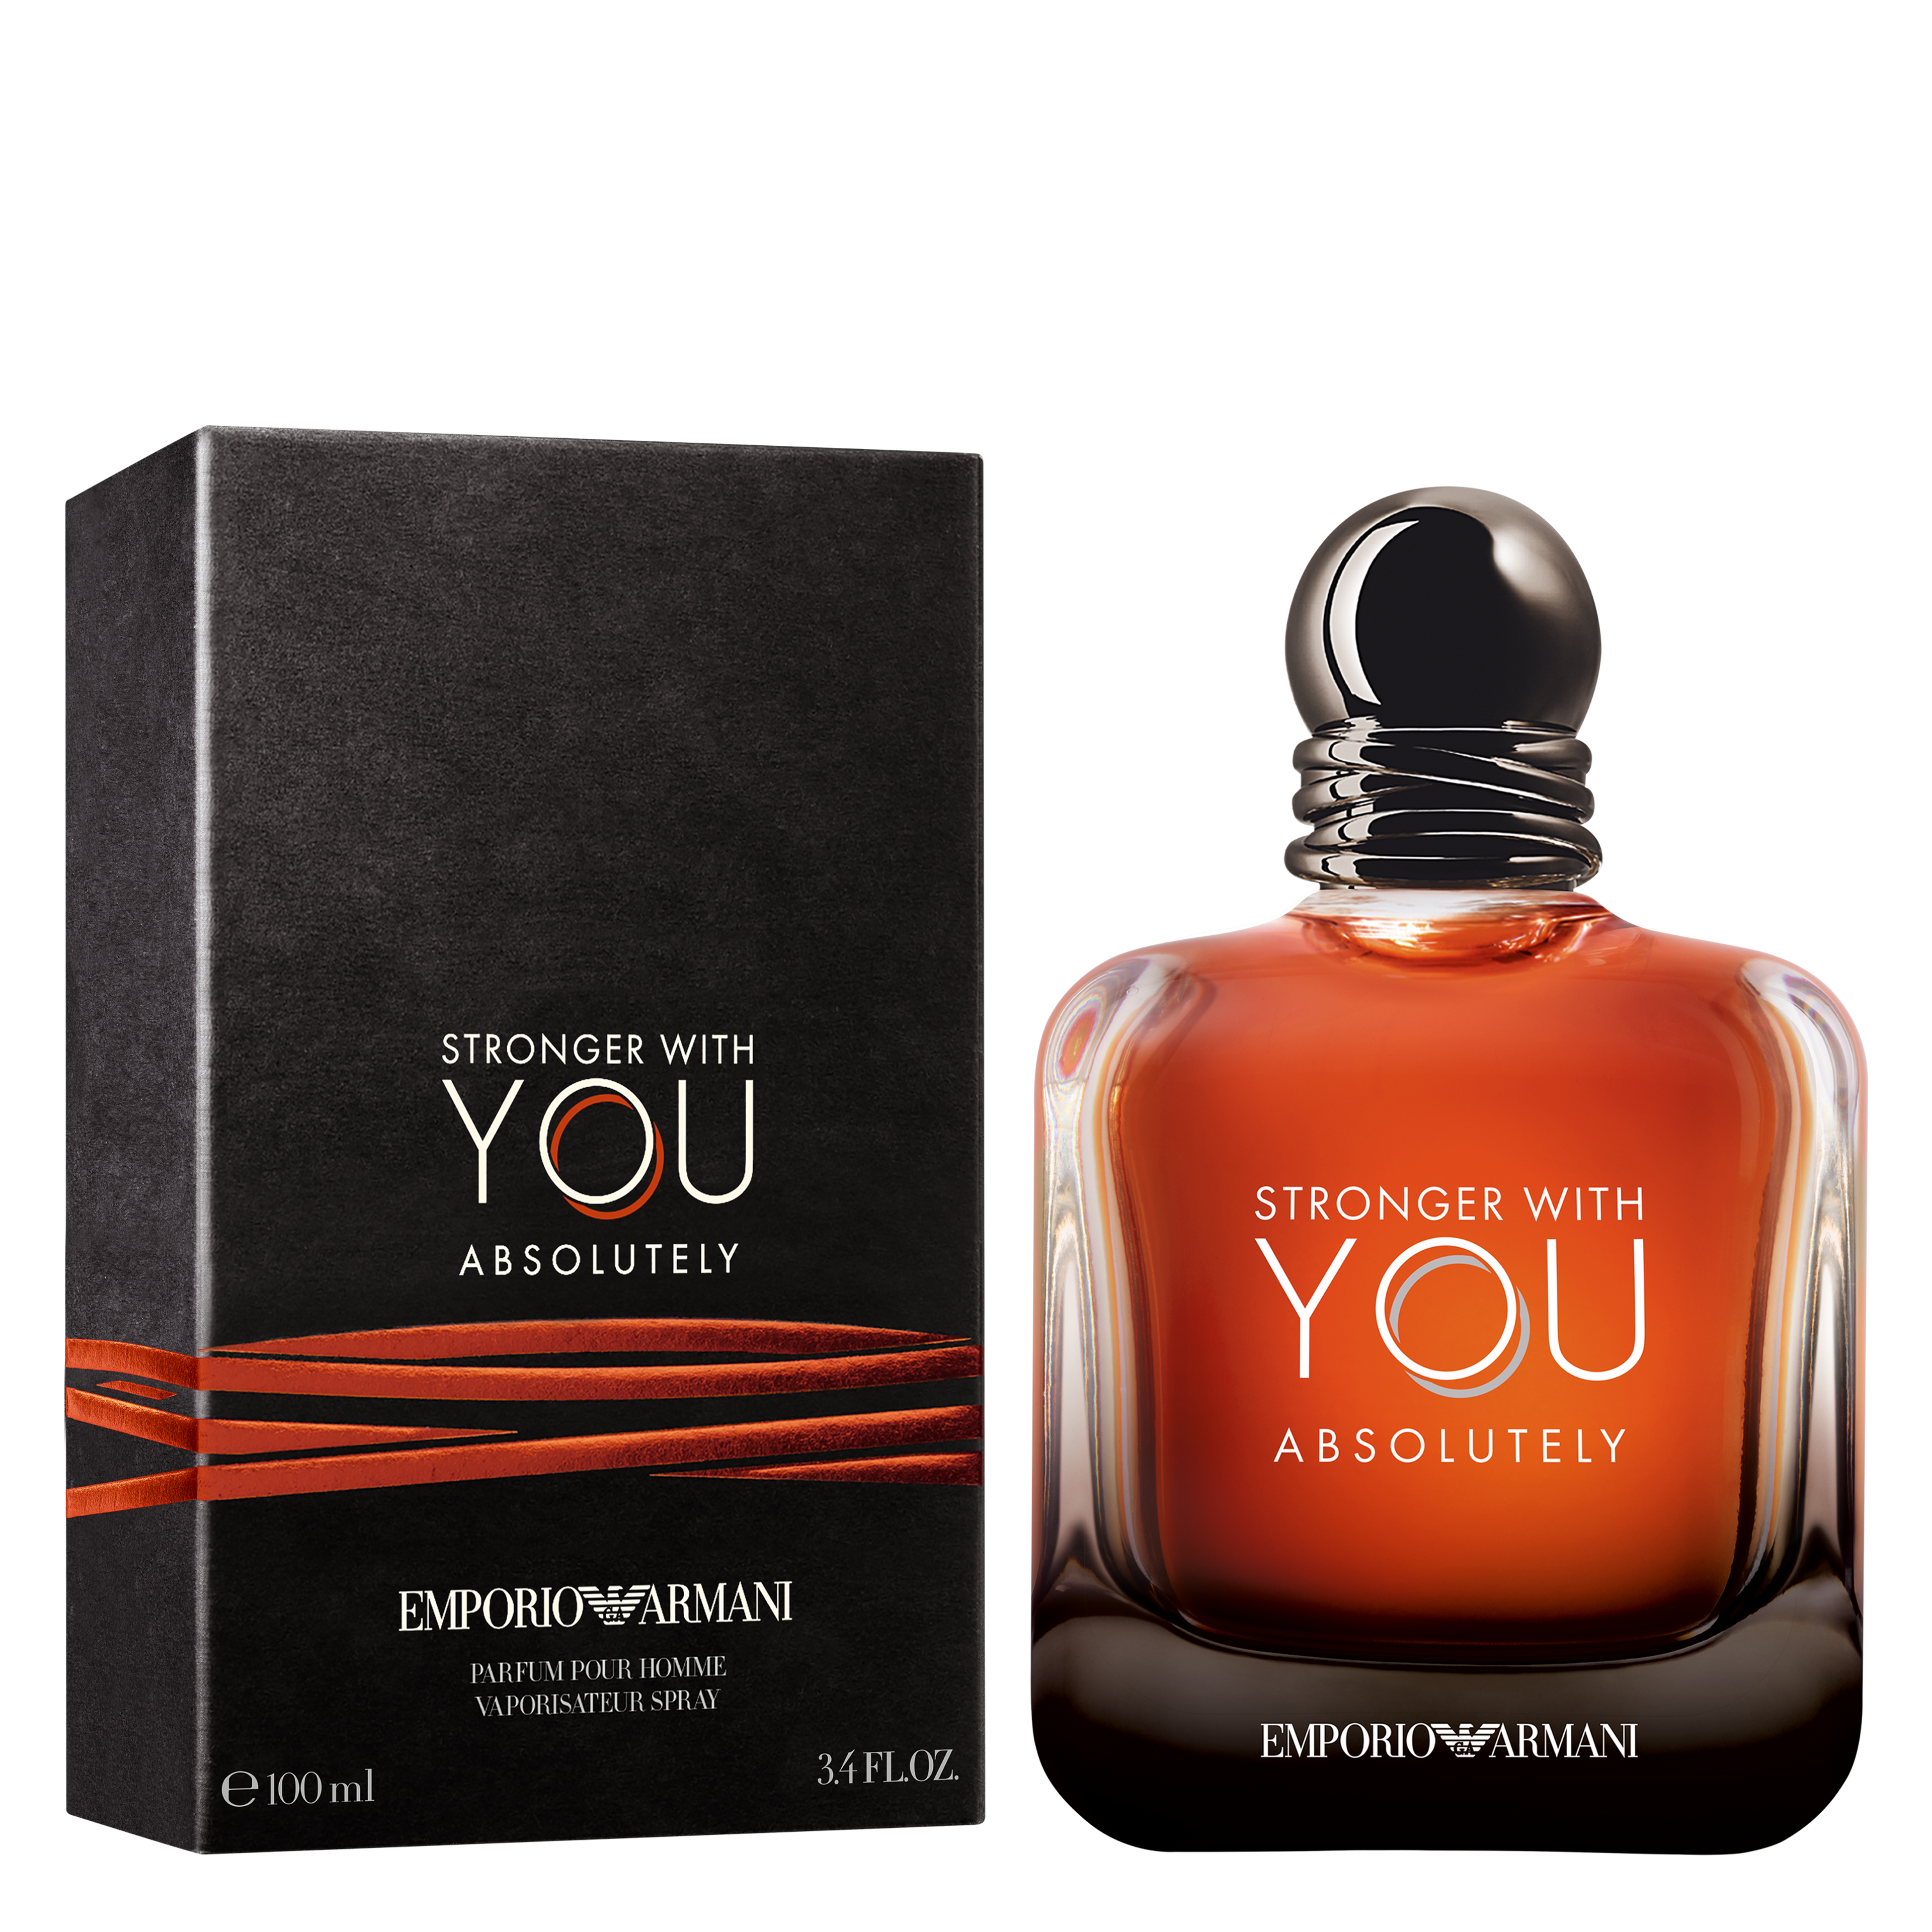 Emporio Armani Stronger With You Absolutely Armani 2